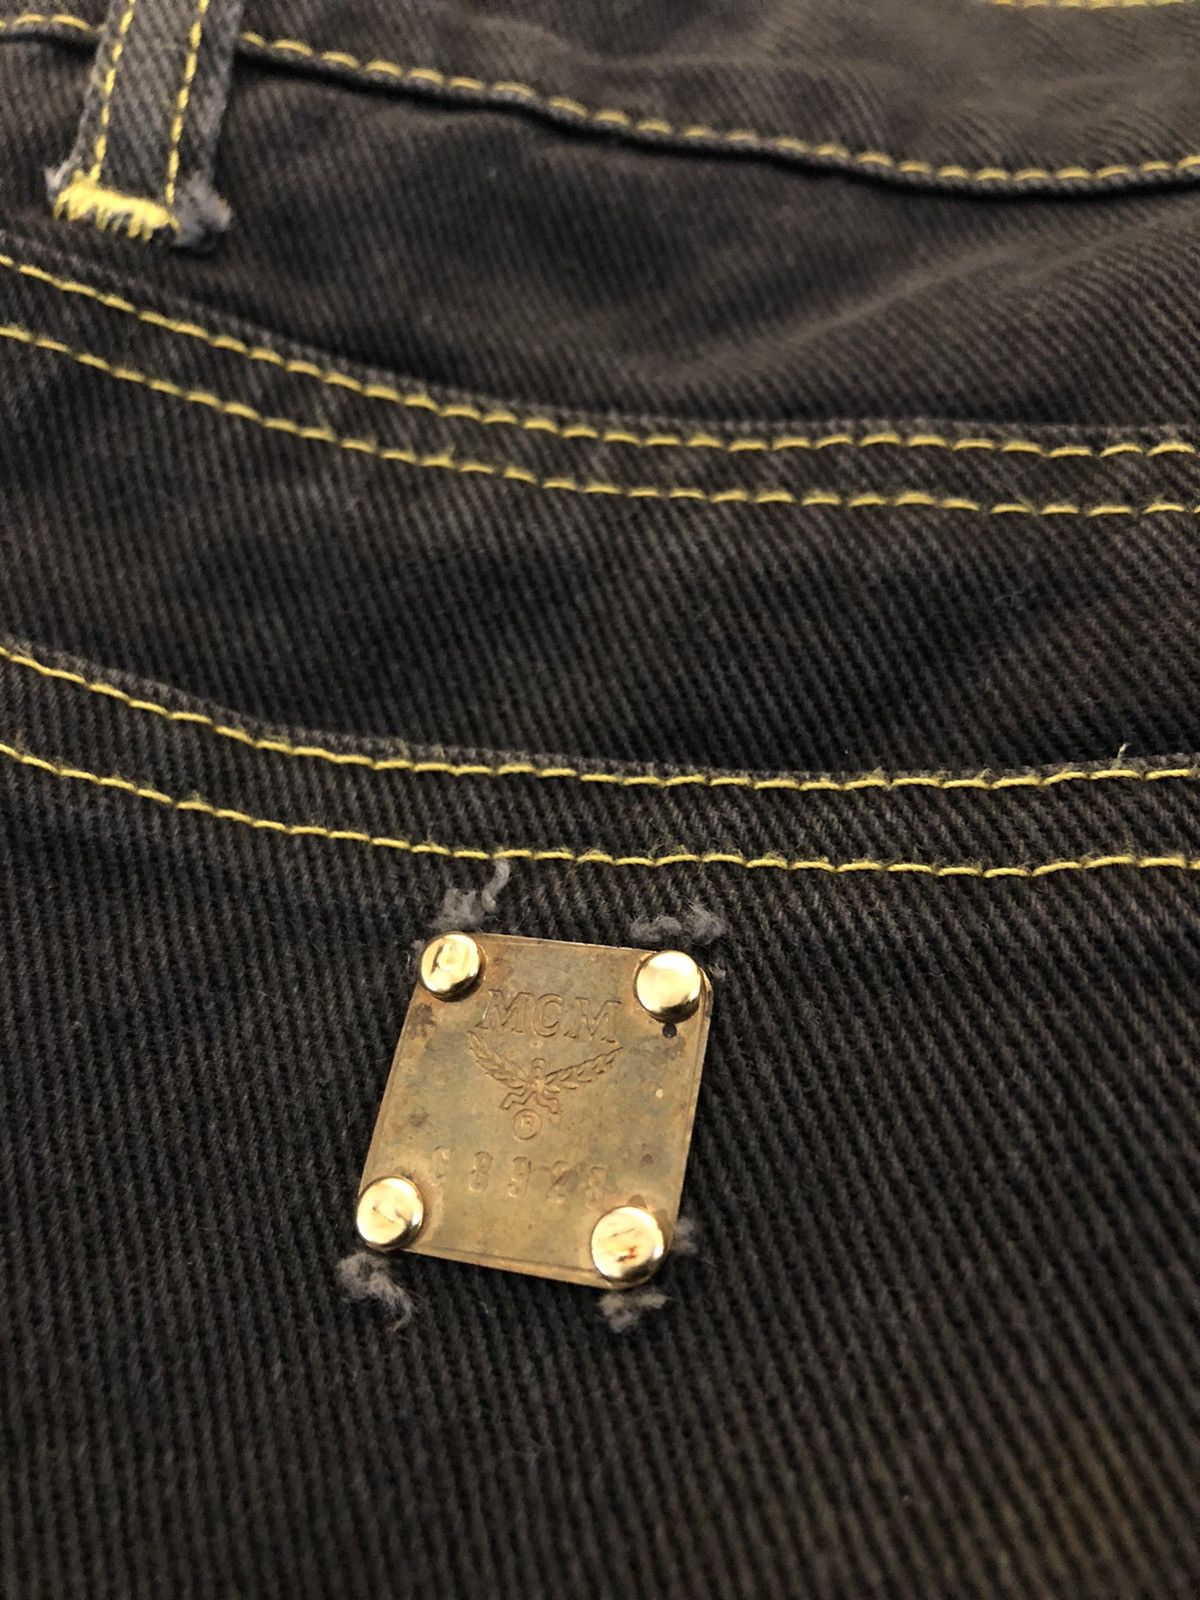 Vintage MCM Jeans Made Italy - 5